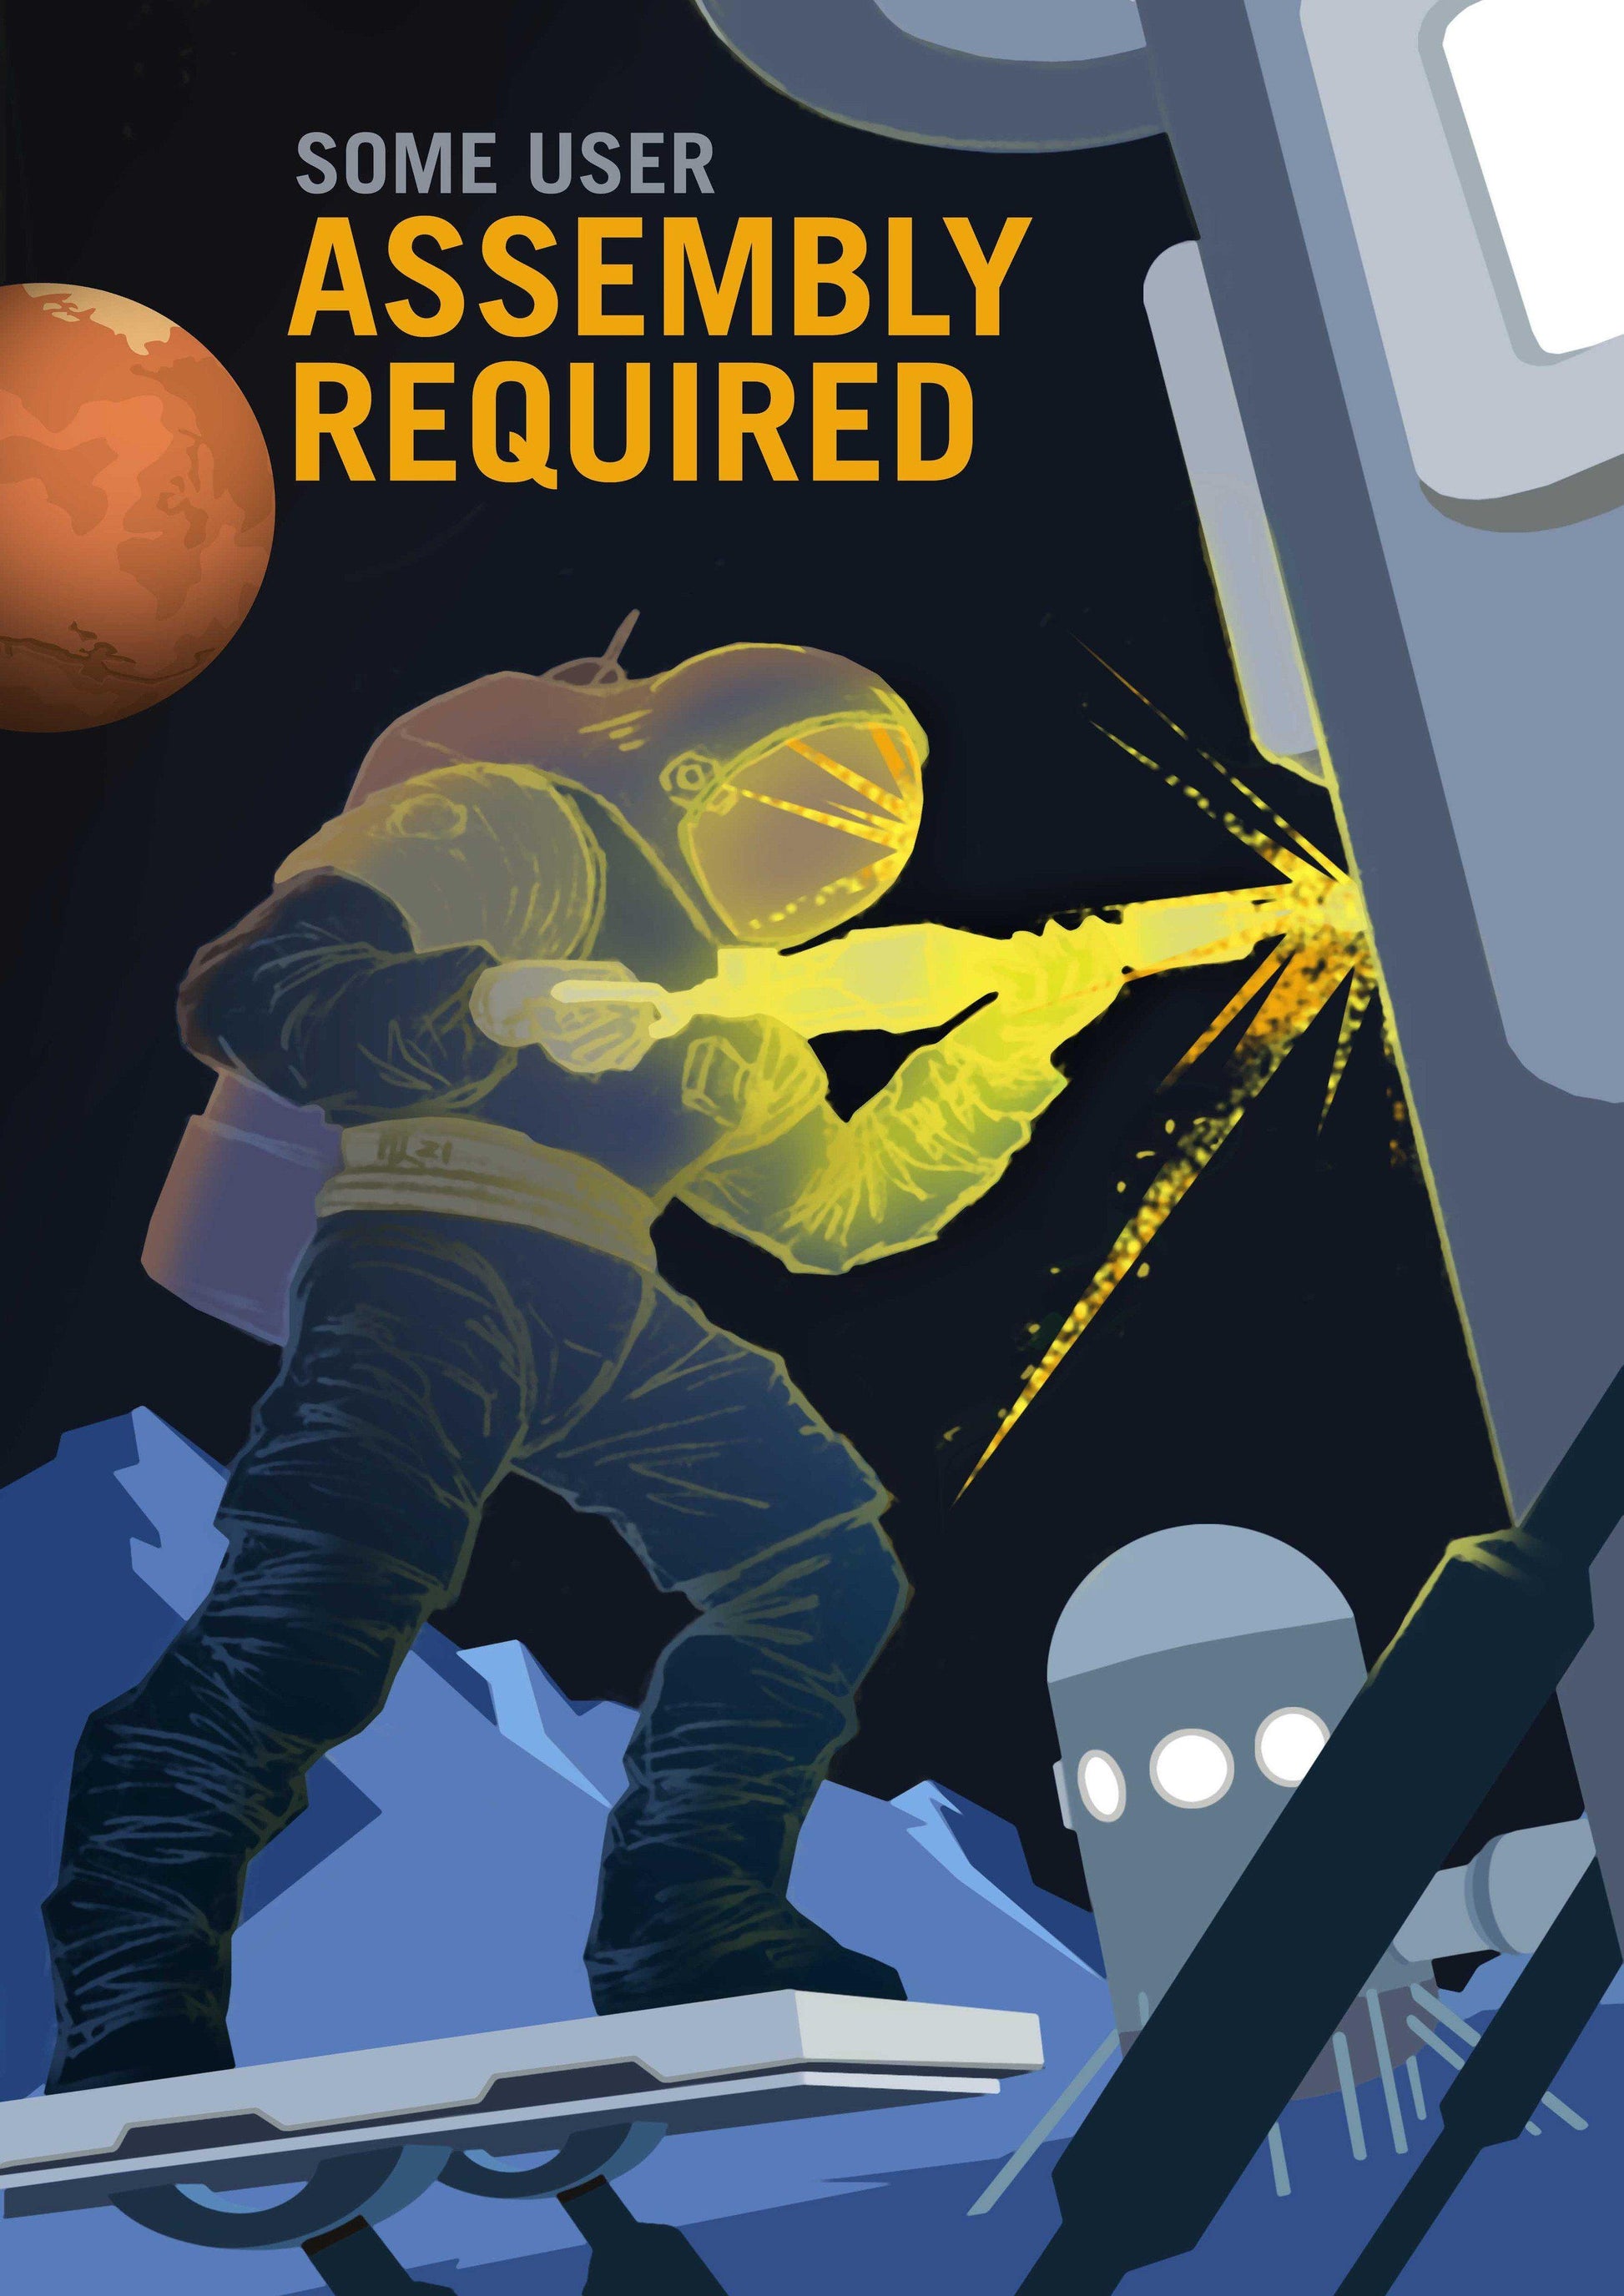 ASSEMBLY REQUIRED: NASA Space Explorers Poster - Pimlico Prints